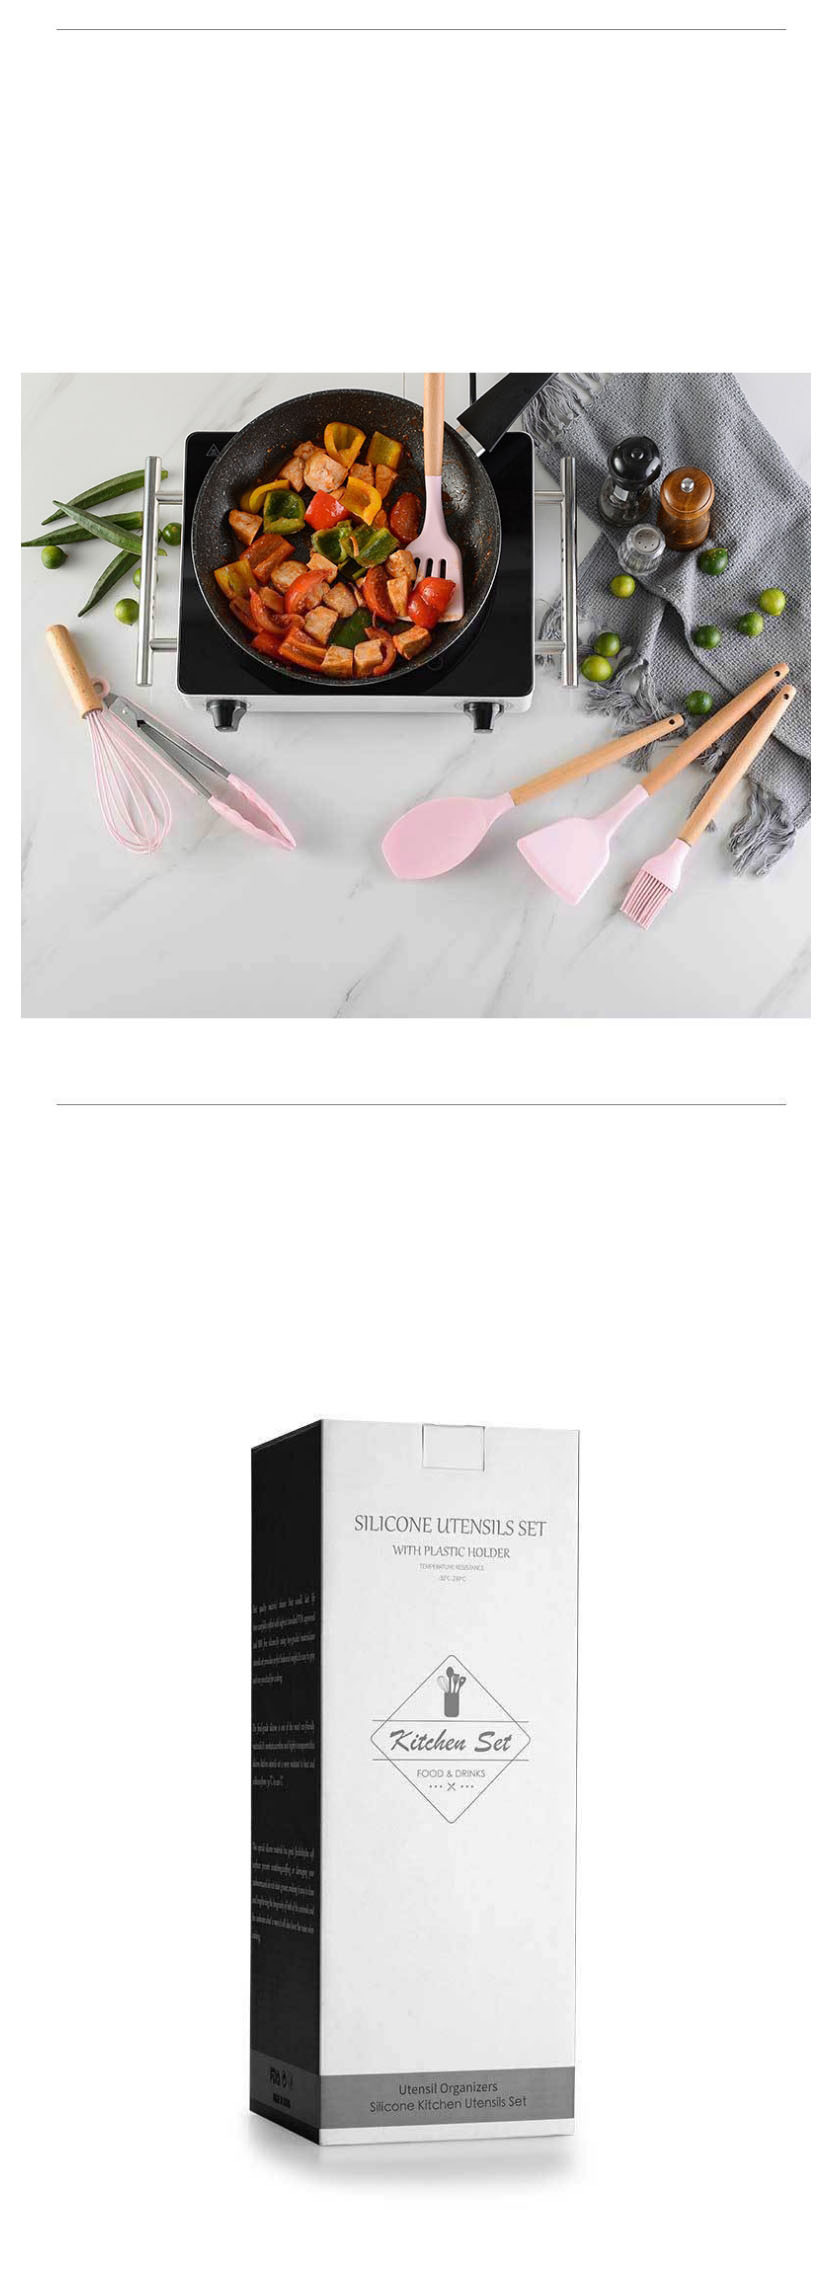 Fashion Pink Paws Pink Solid Wood Handle With Bucket And Silica Gel Kitchenware,Kitchen